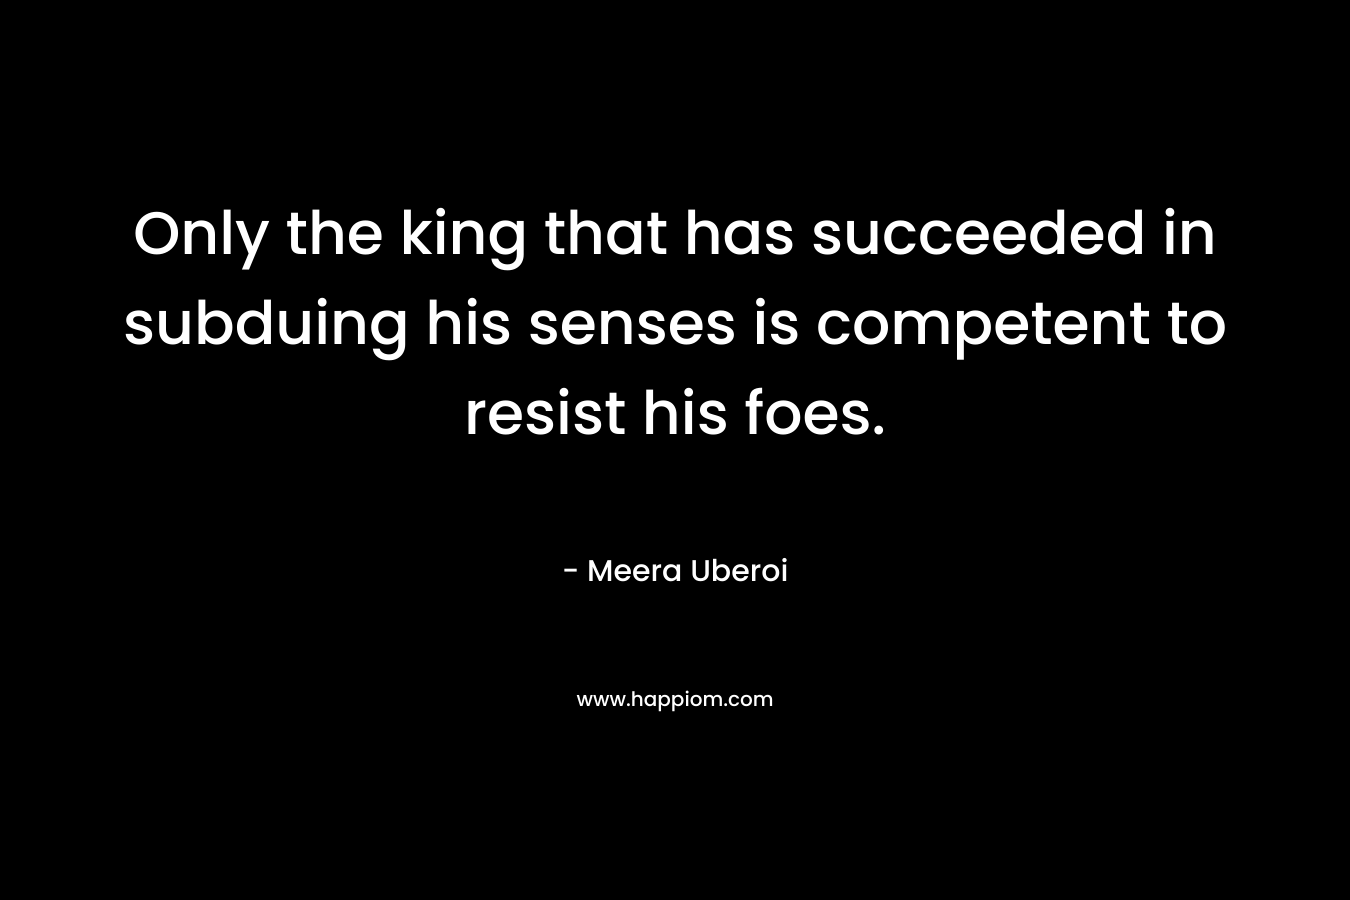 Only the king that has succeeded in subduing his senses is competent to resist his foes. – Meera Uberoi